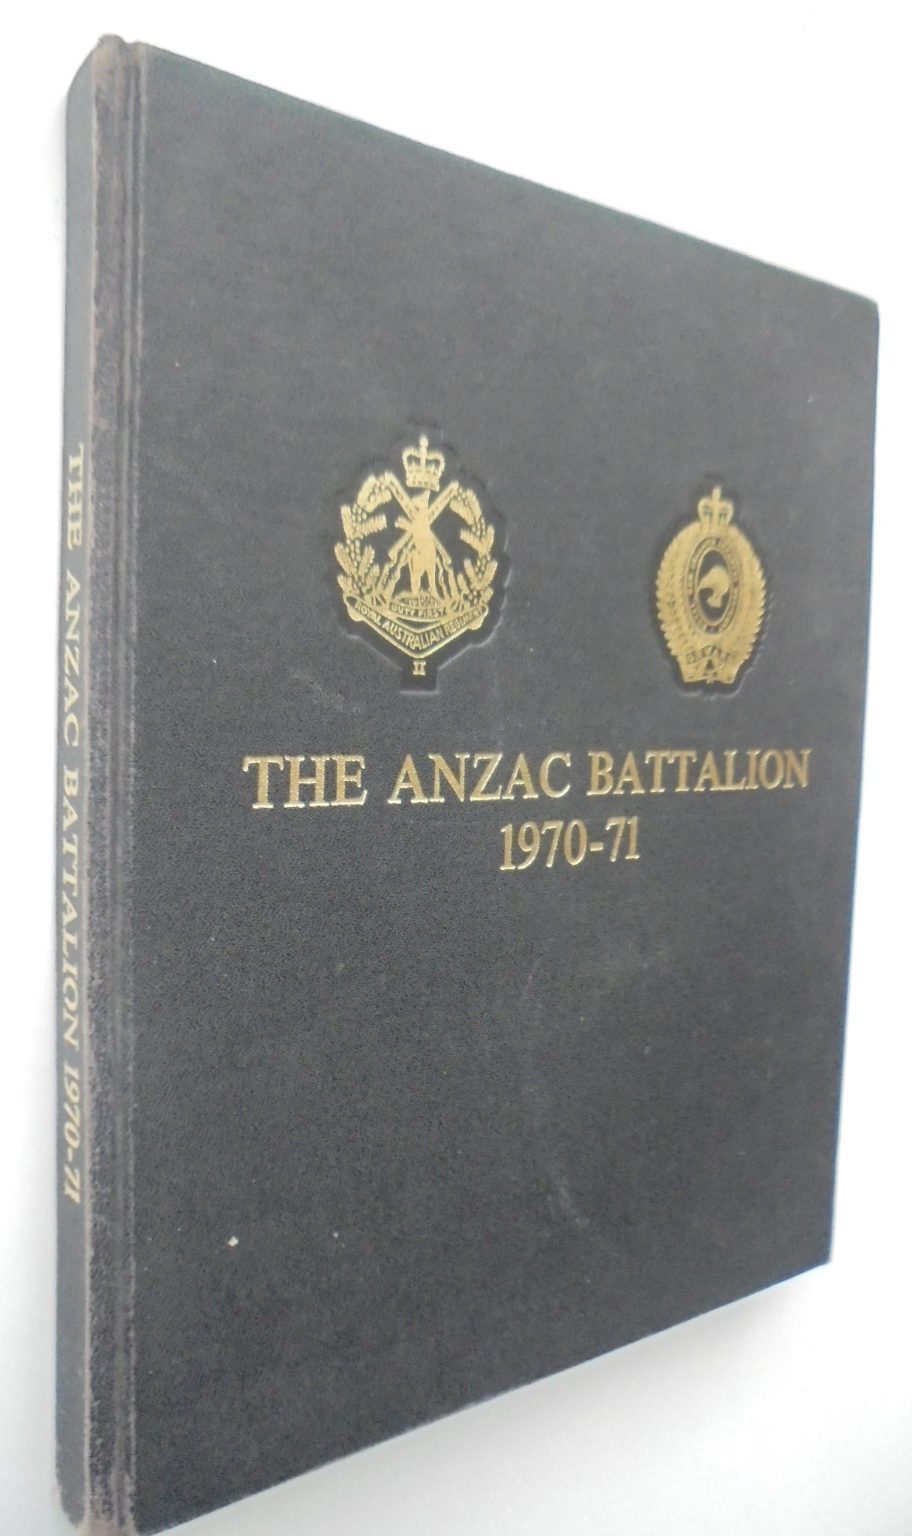 The Anzac Battalion, 1970-71 by Major A R Roberts (editor).